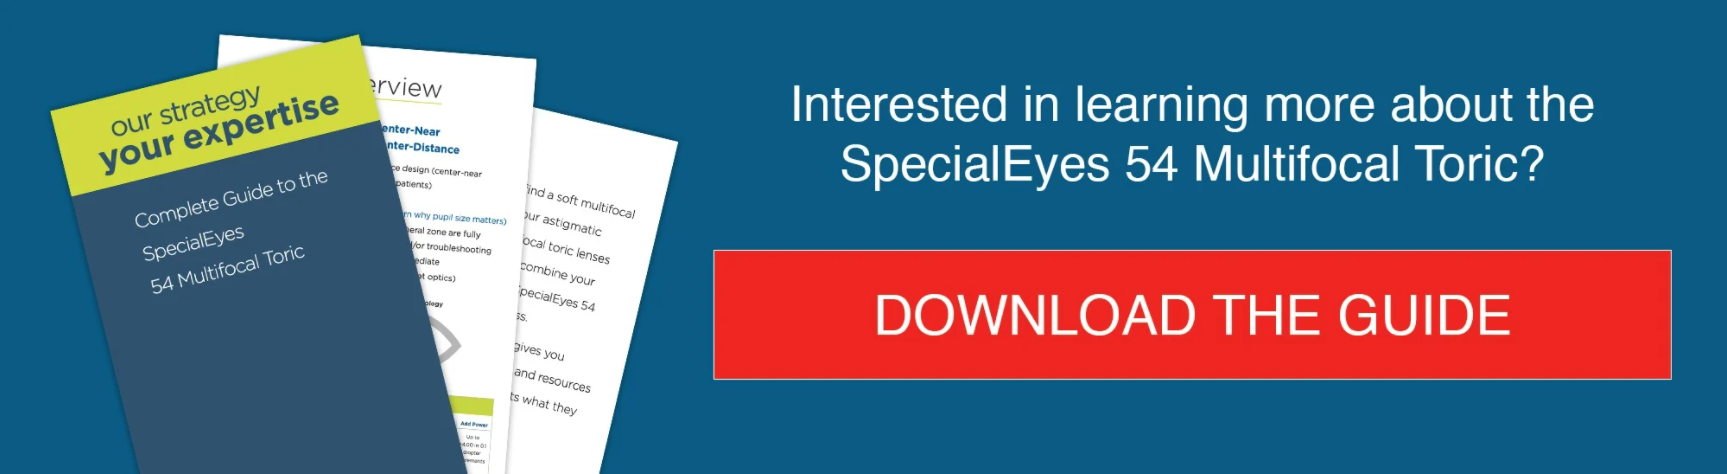 Complete Guide to the SpecialEyes 54 Multifocal Toric